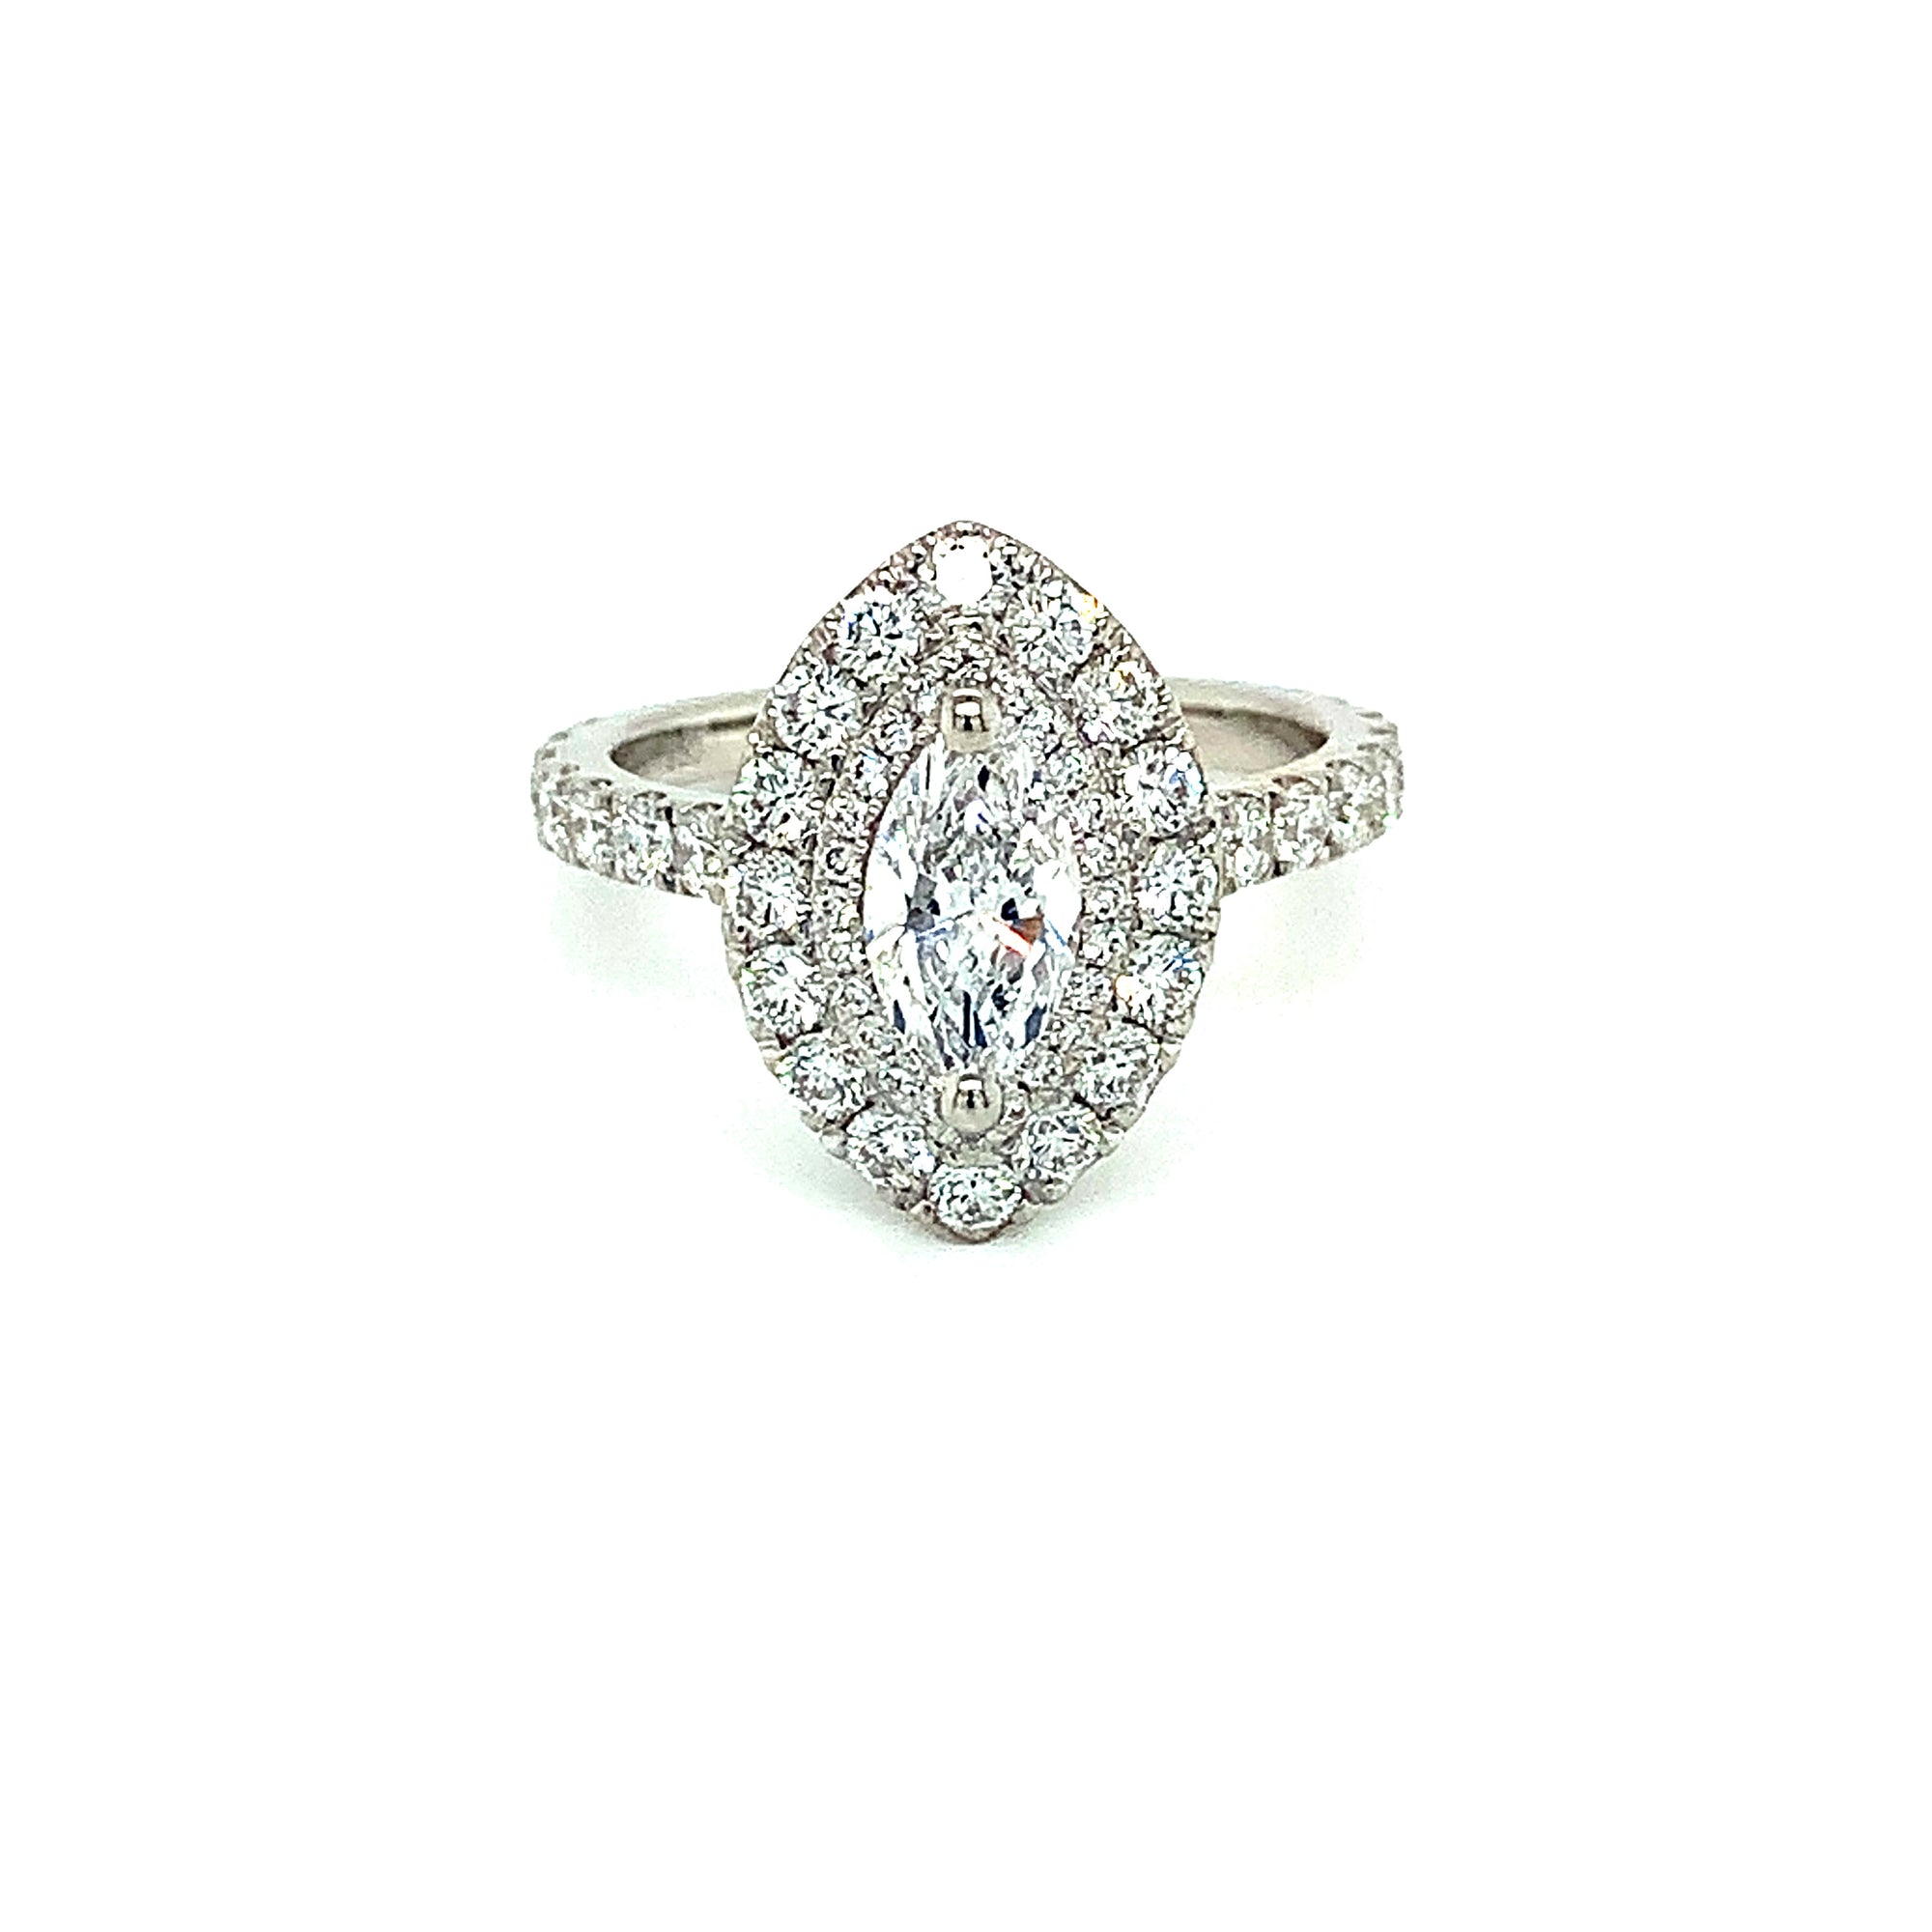 1.89ct marquise diamond engagement ring, platinum, D colour, SI1 clarity, GIA certified